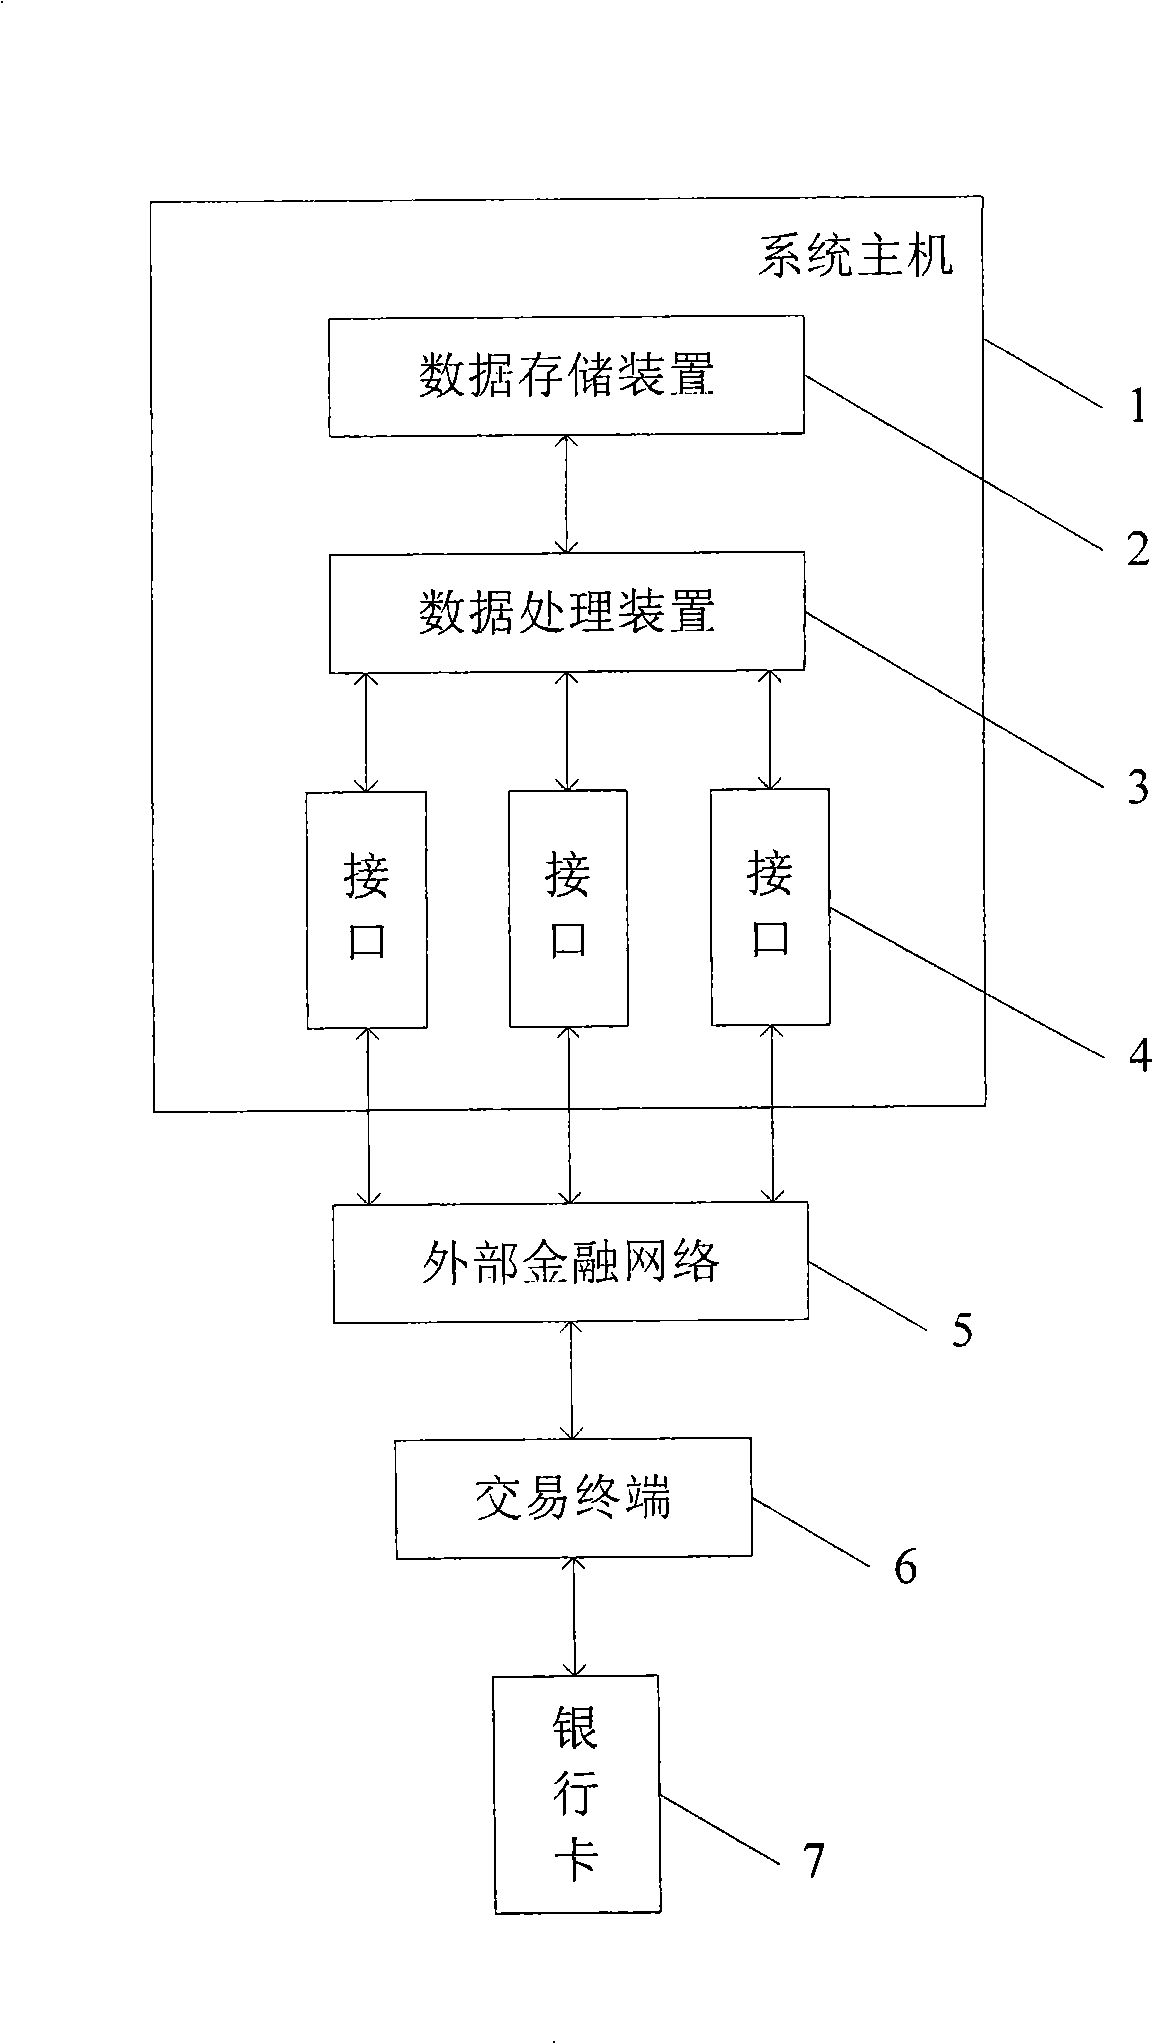 System and method for implementing signed jointly commerce card